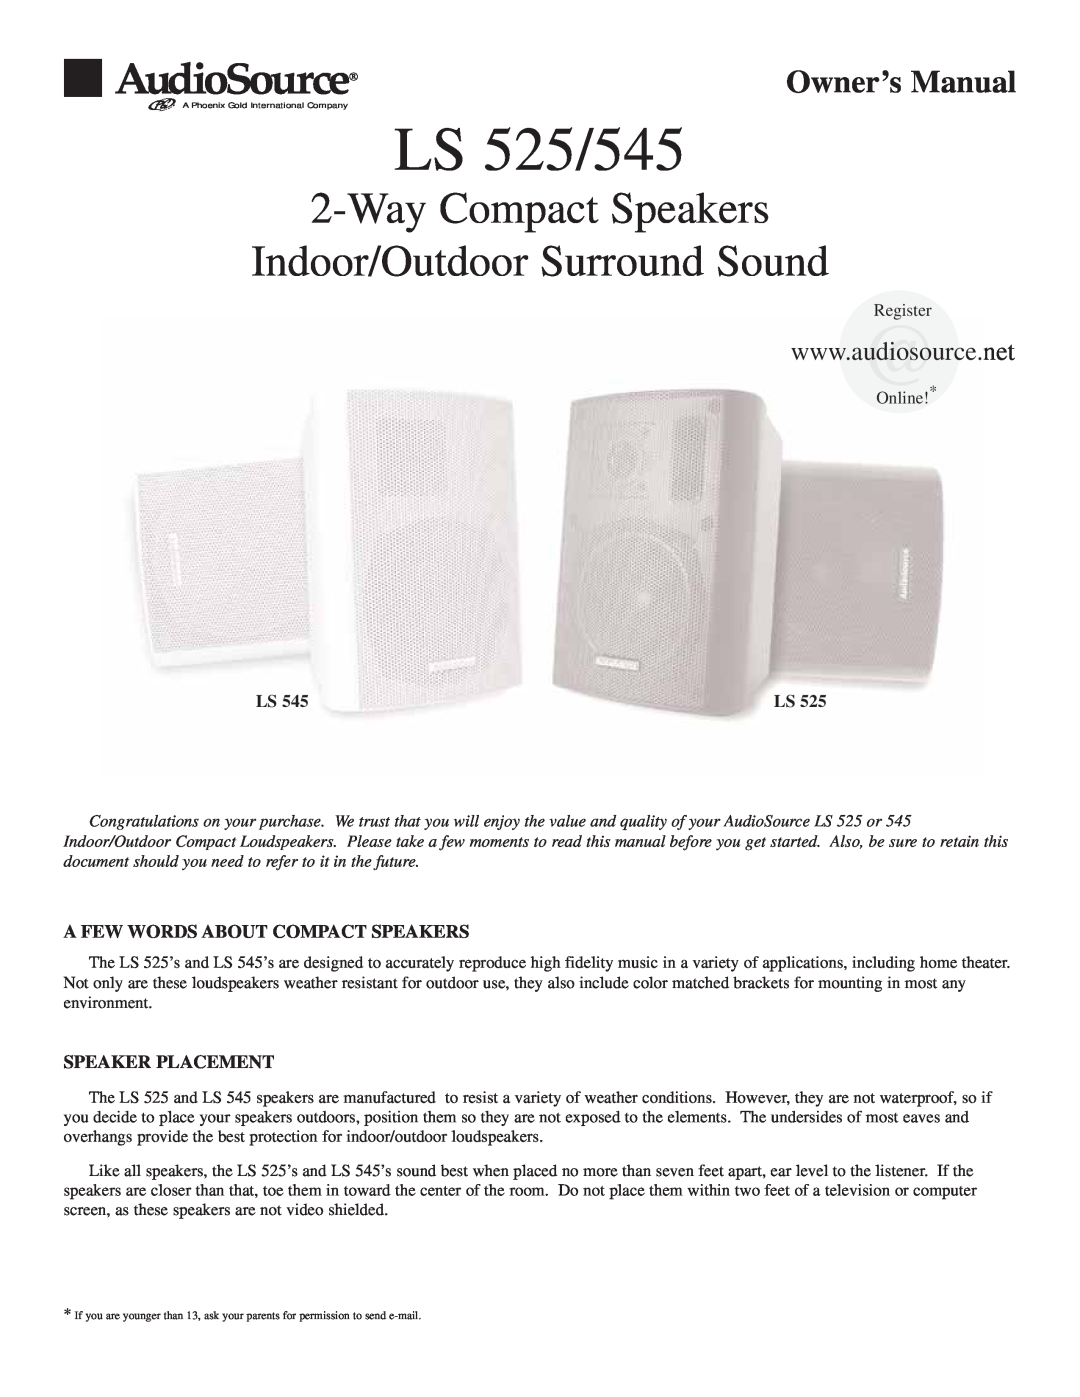 AudioSource LS 545 owner manual A Few Words About Compact Speakers, Speaker Placement, LS 525/545, WayCompact Speakers 